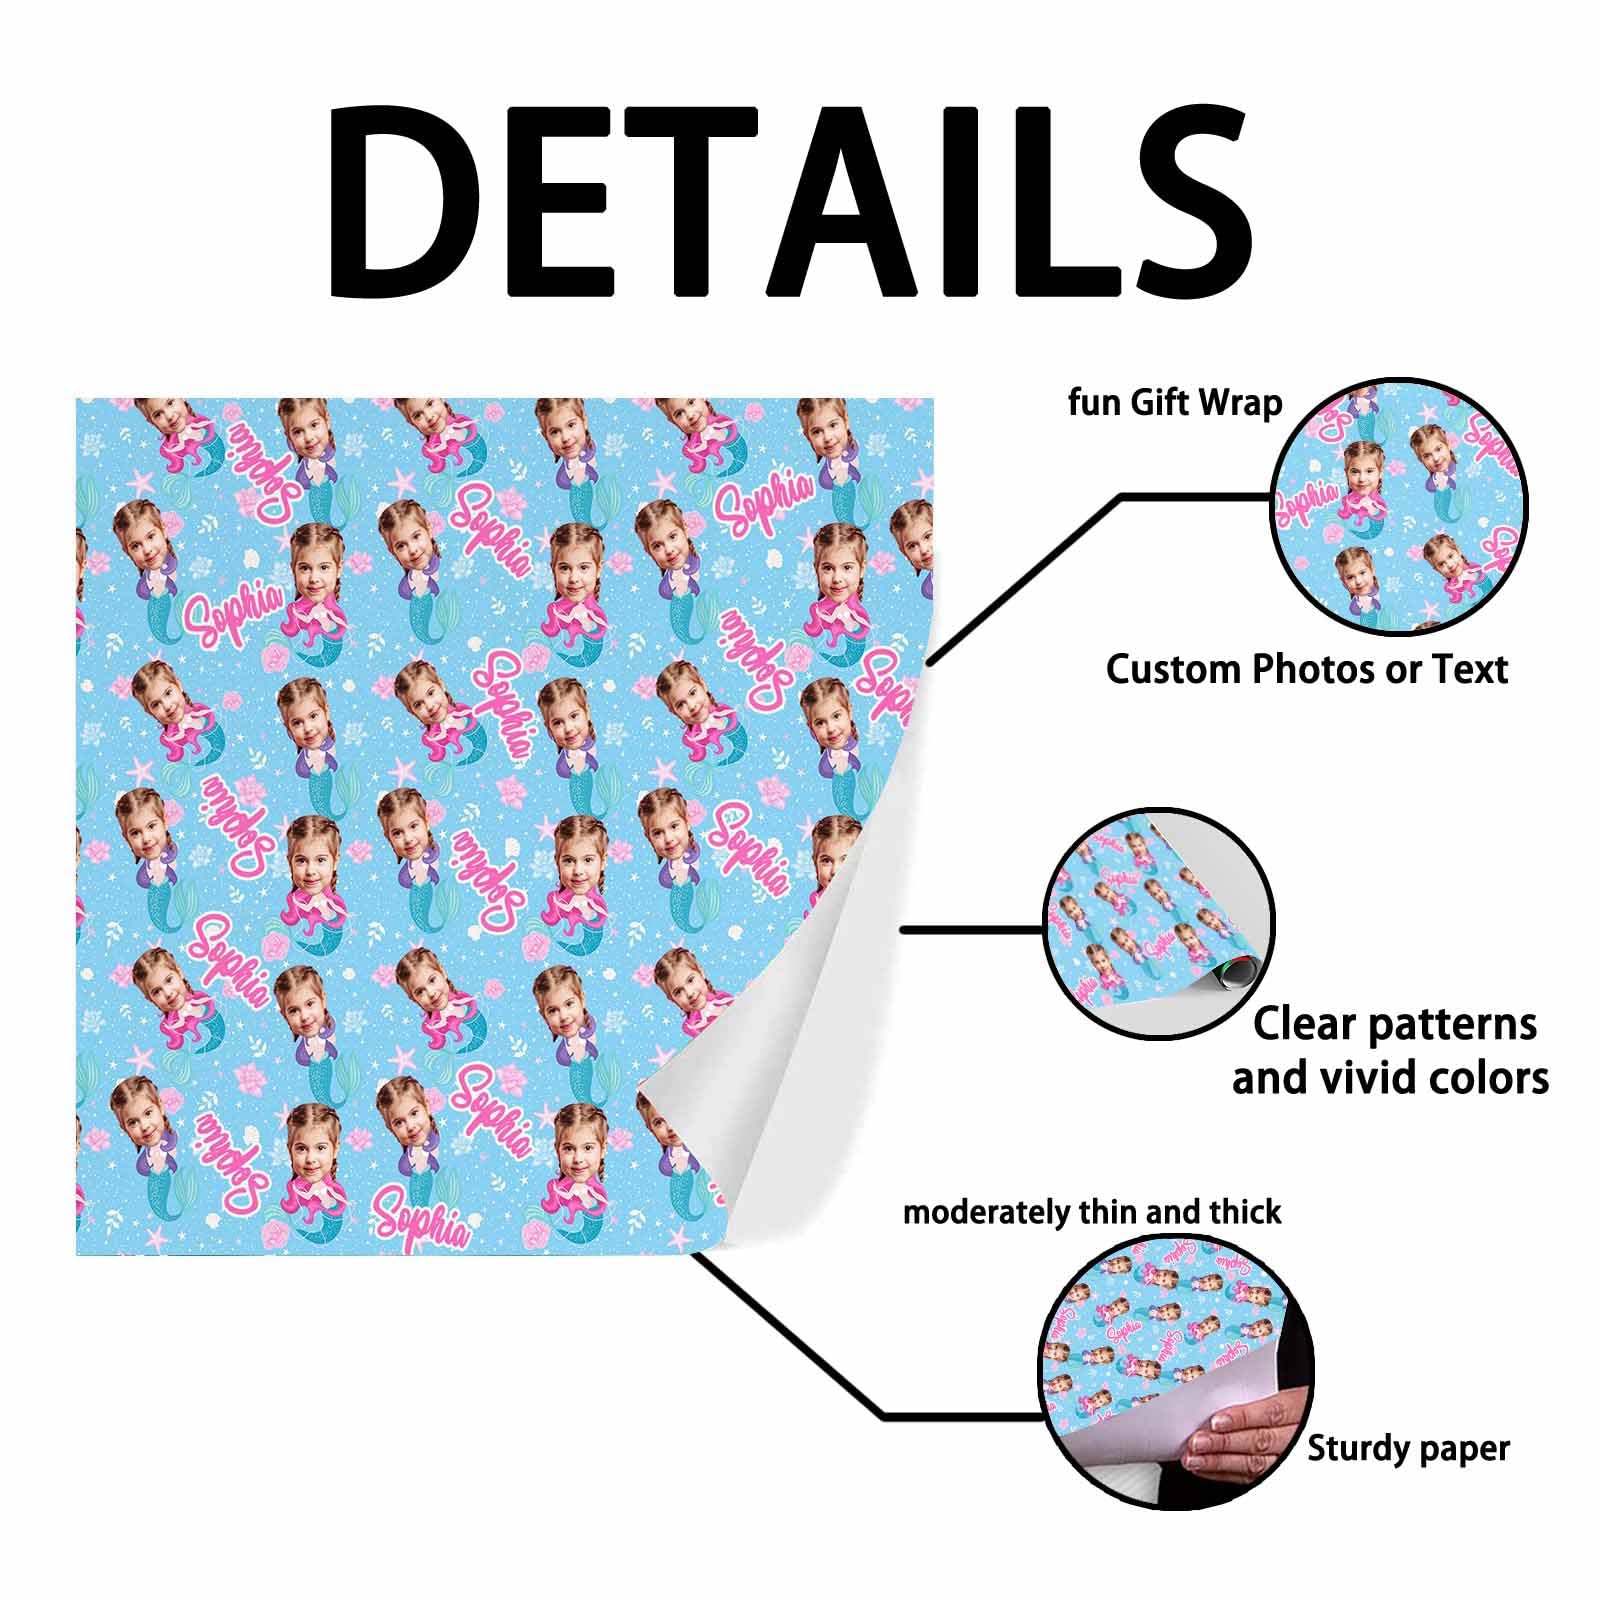 Jaydouble Custom Christmas Wrapping Paper Rolls for Kids Boys Girls Personalized Photo Wrapping Paper Daughter Son Customized Funny Gift Wrapping Paper for Dad Mam Grandma Grandpa 58"x 23"